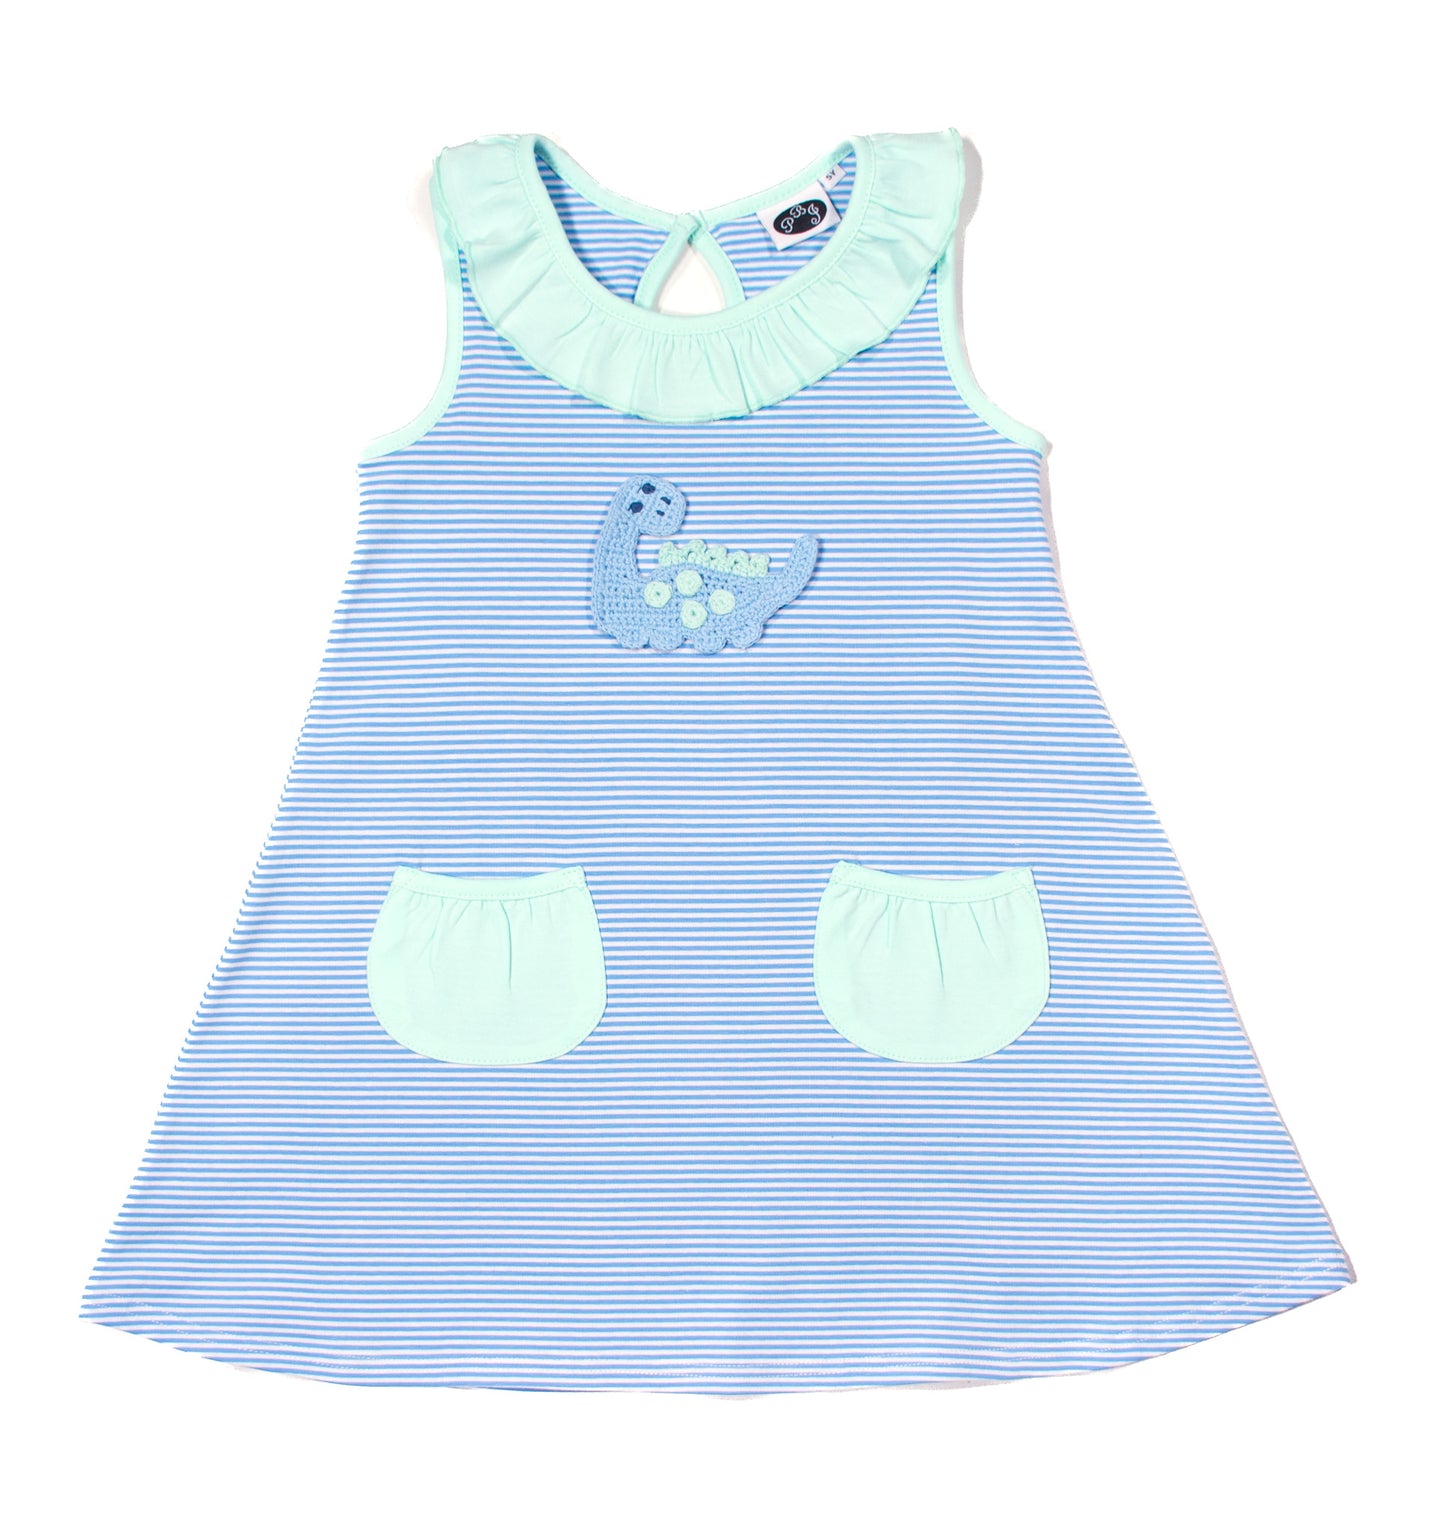 Swing Dress with pockets cobalt stripes w/ solid mint - PREORDER